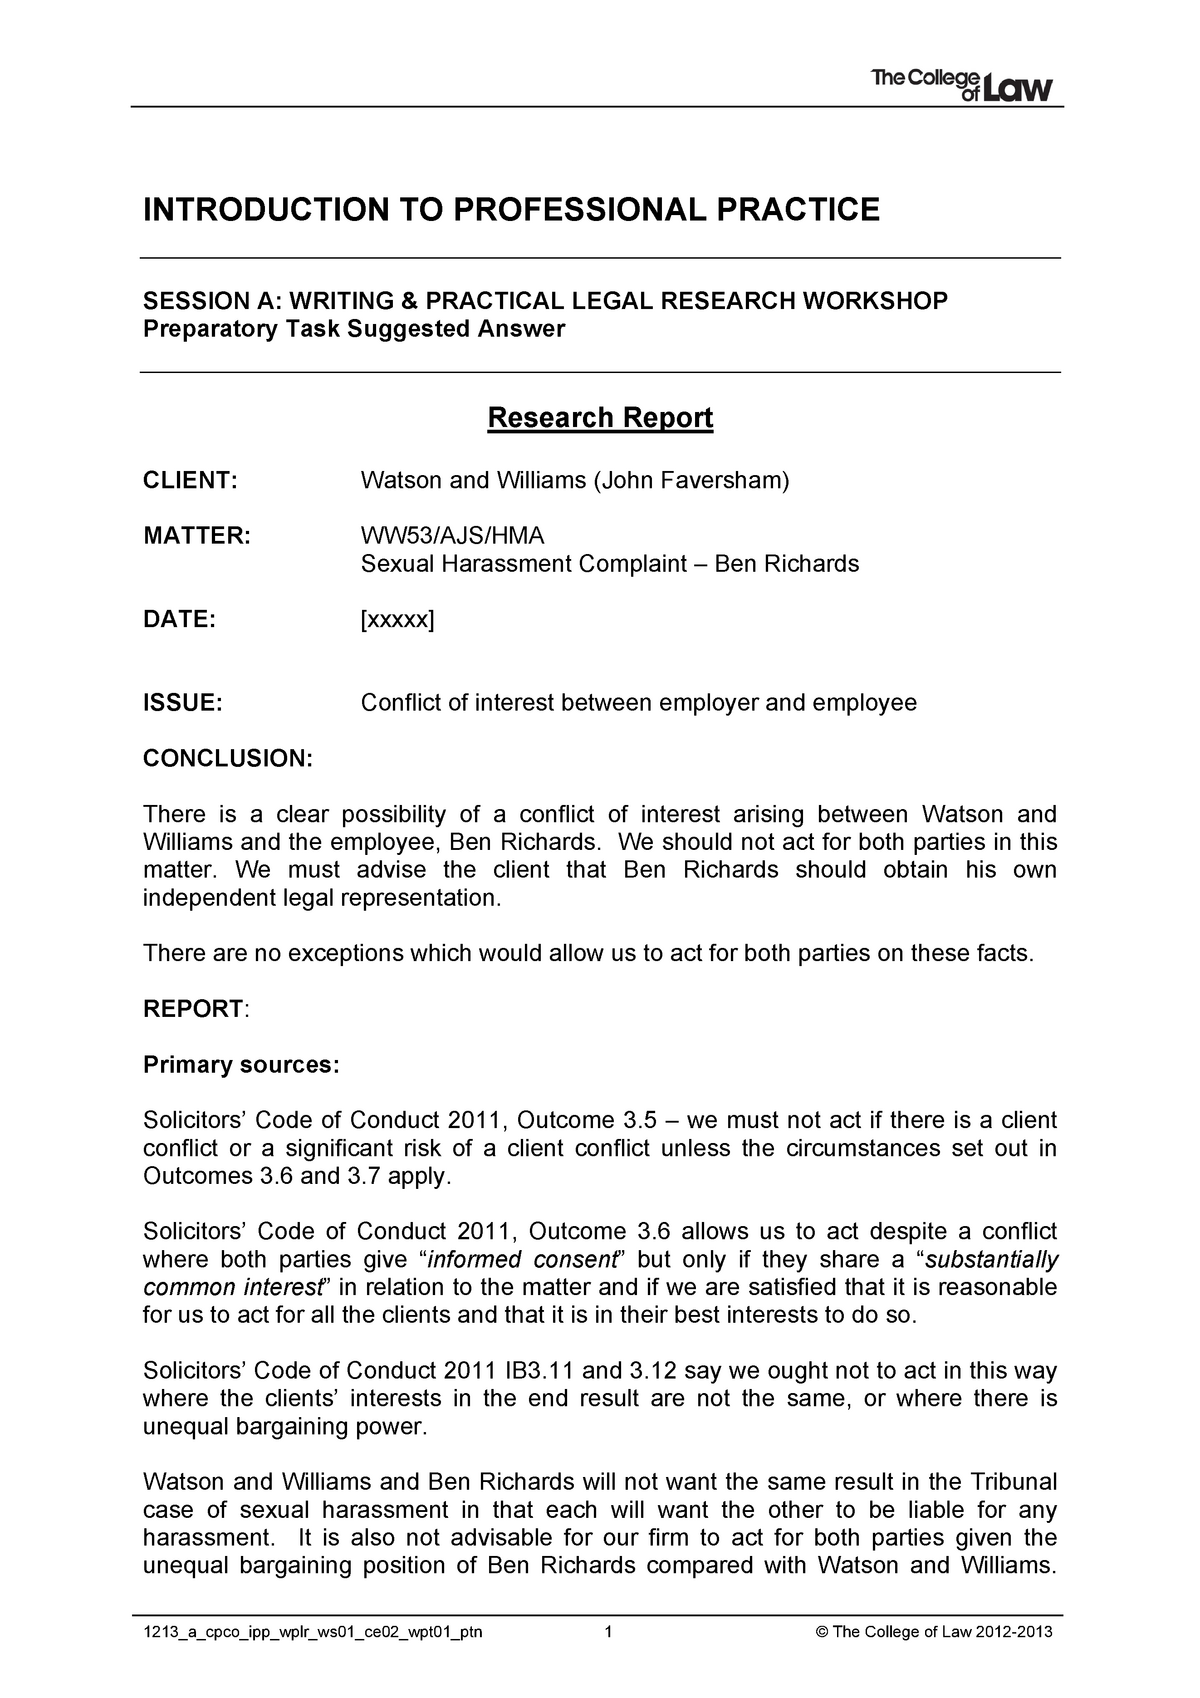 legal research report